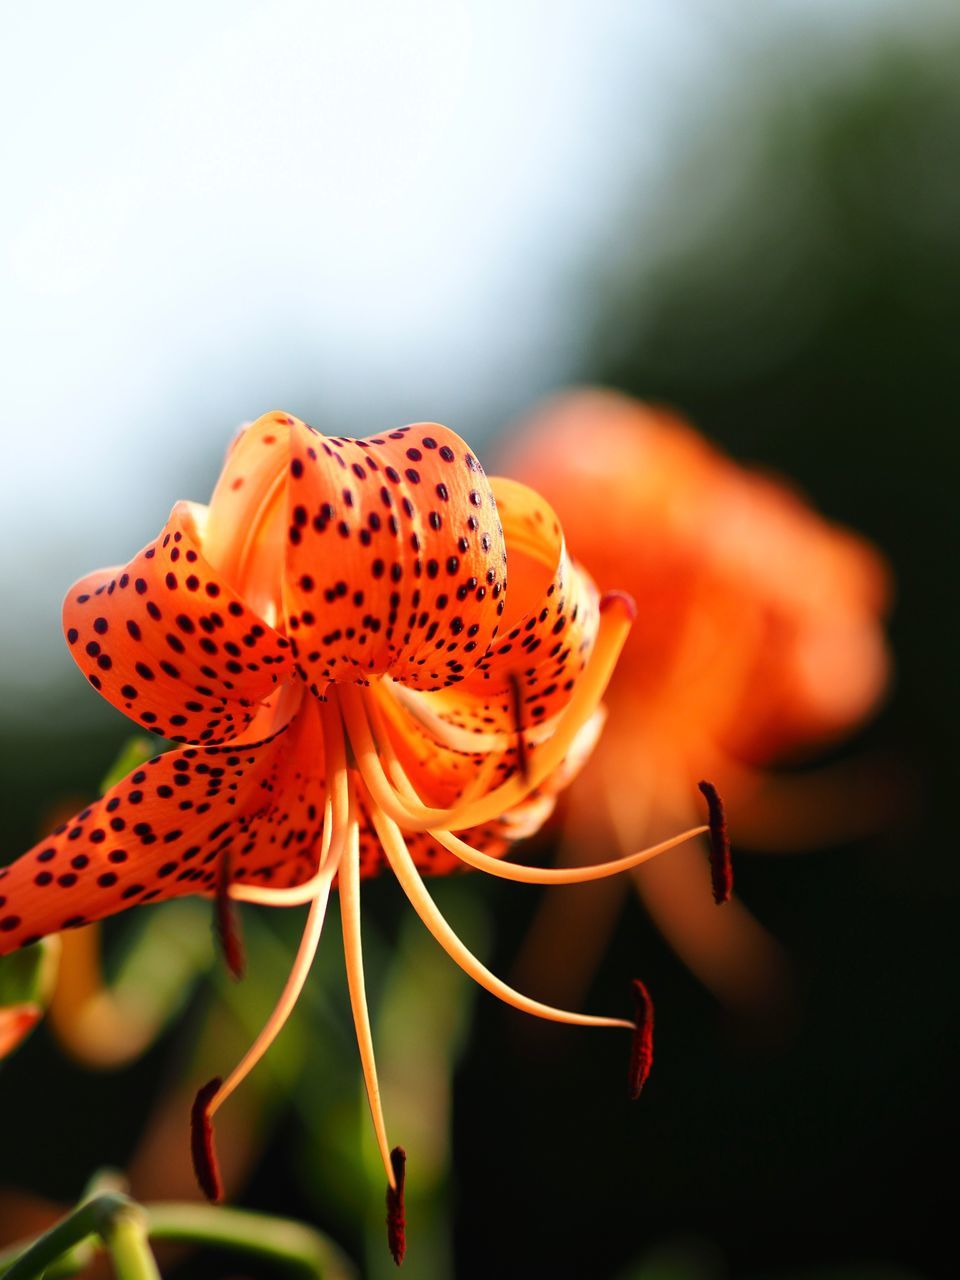 flower, flowering plant, vulnerability, fragility, close-up, plant, beauty in nature, petal, growth, flower head, freshness, focus on foreground, orange color, inflorescence, nature, no people, pollen, day, selective focus, orange